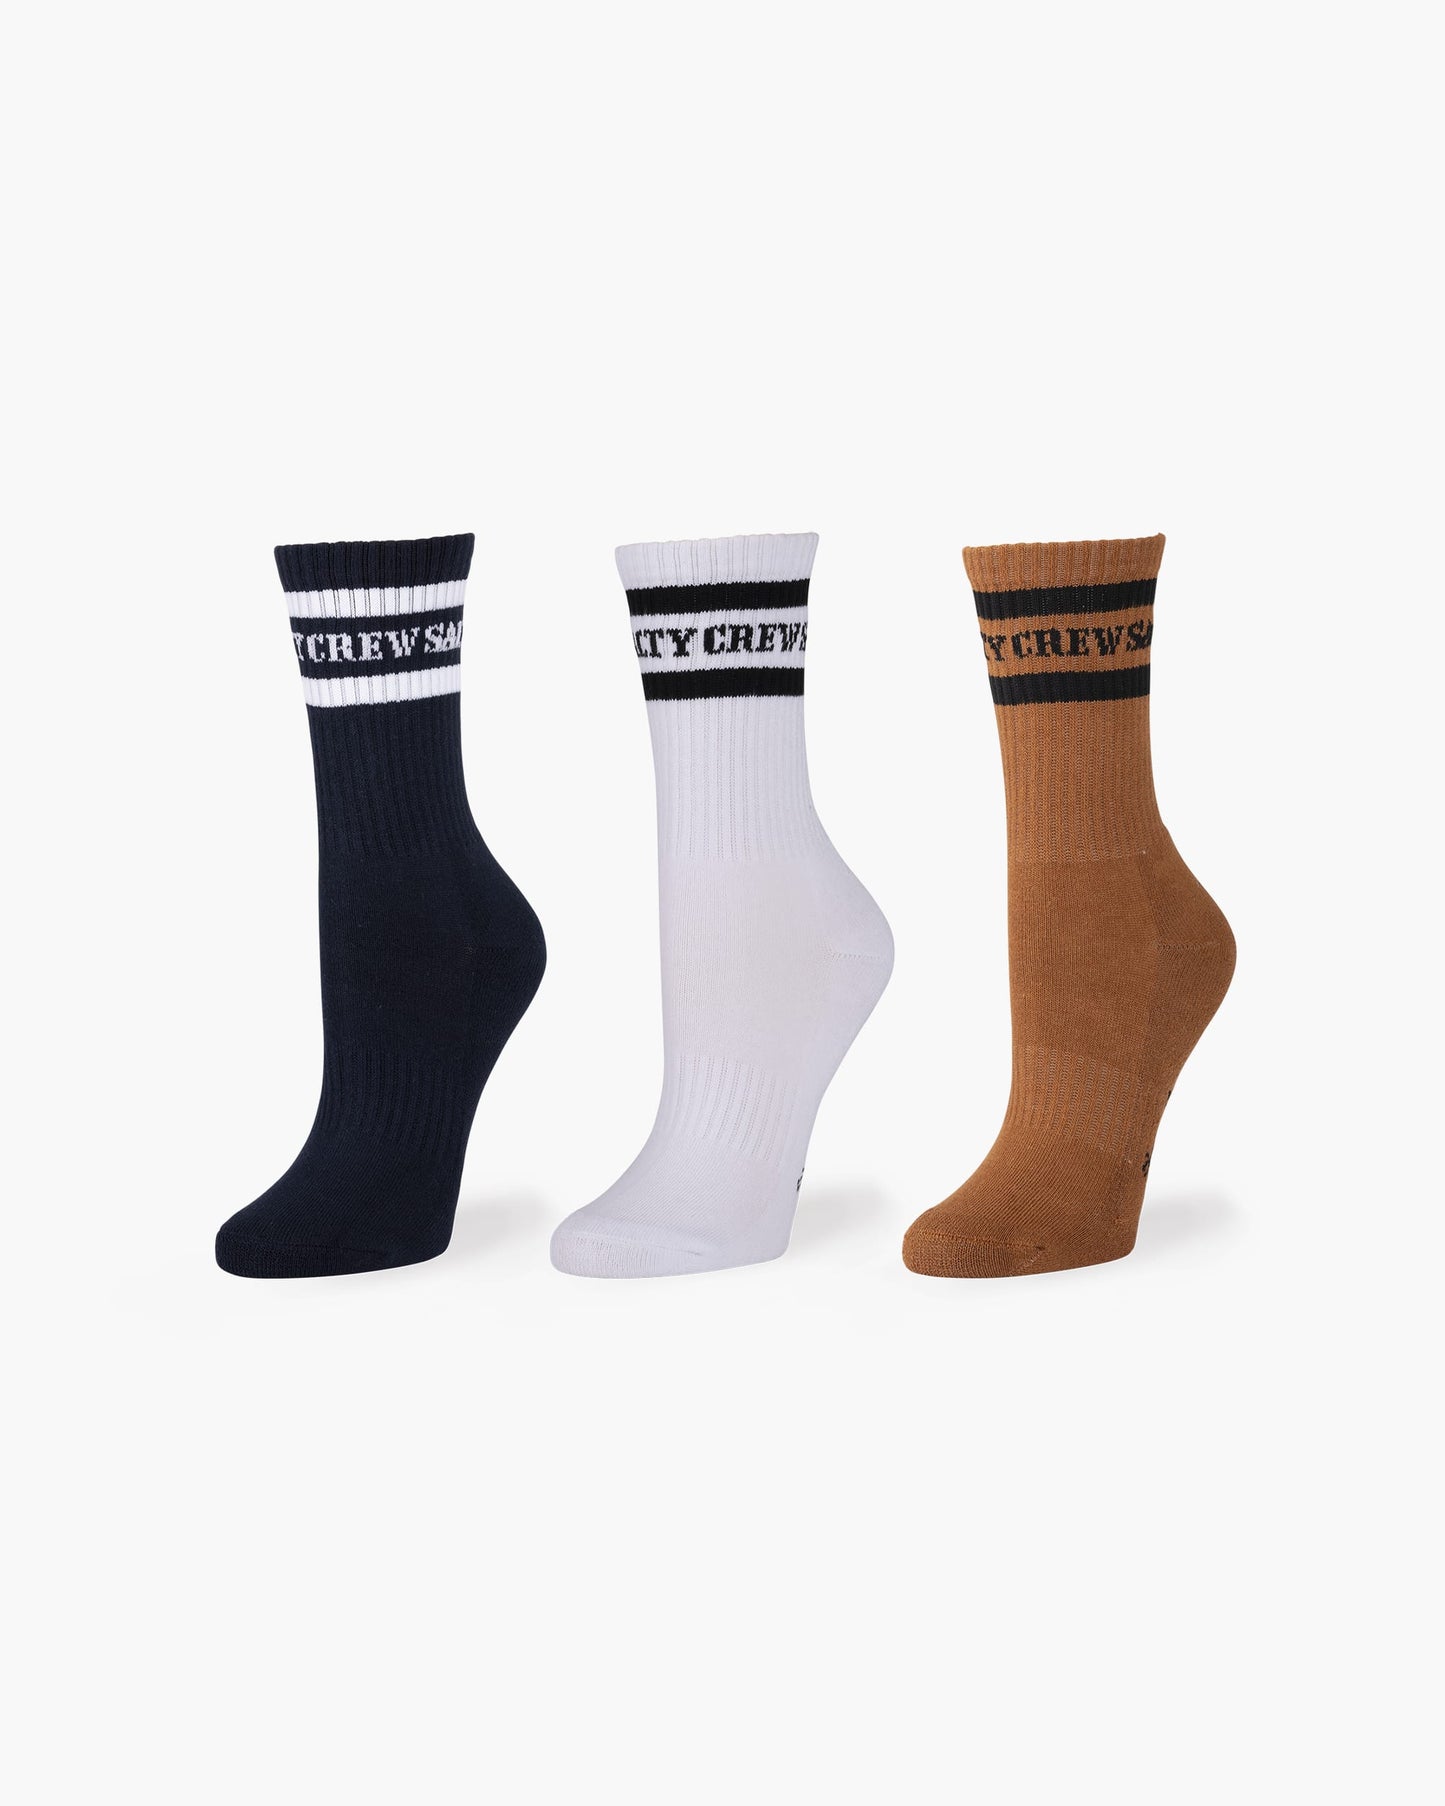 Salty crew SOCKS FRITS SOCK 3 PACK - ASSORTED in ASSORTED